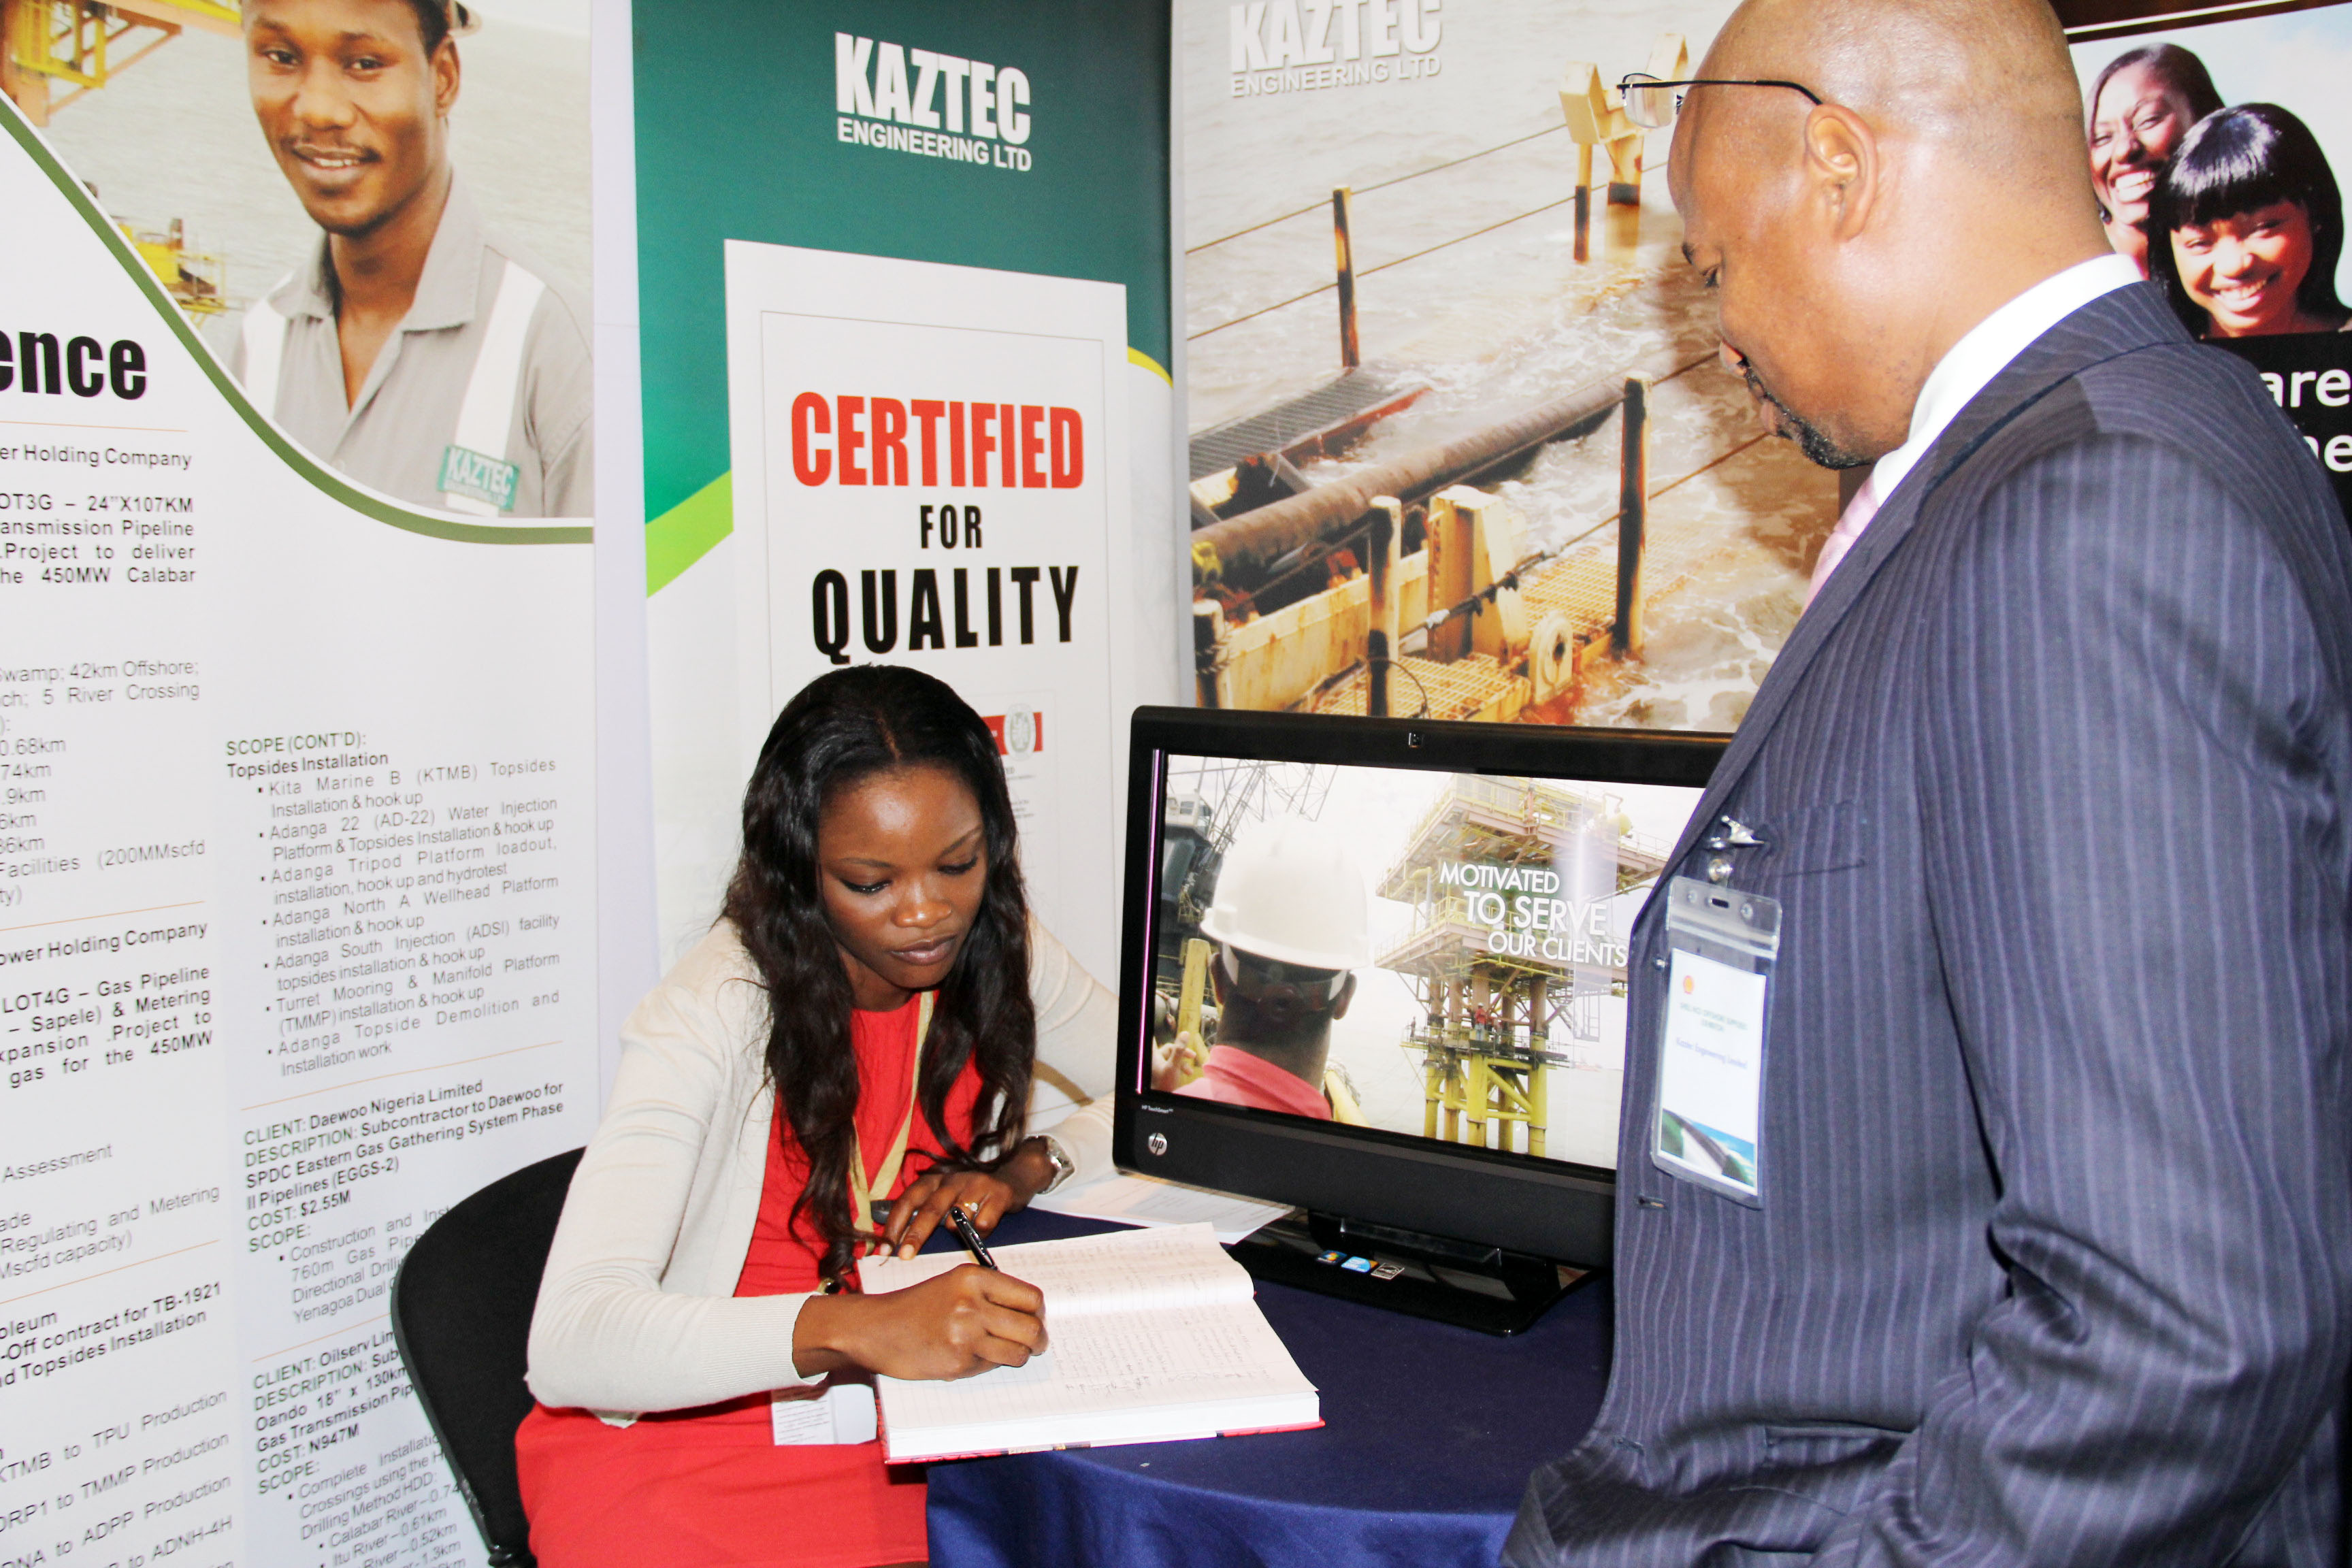 Kaztec Engineering at Shell Nigerian Content Day 2012